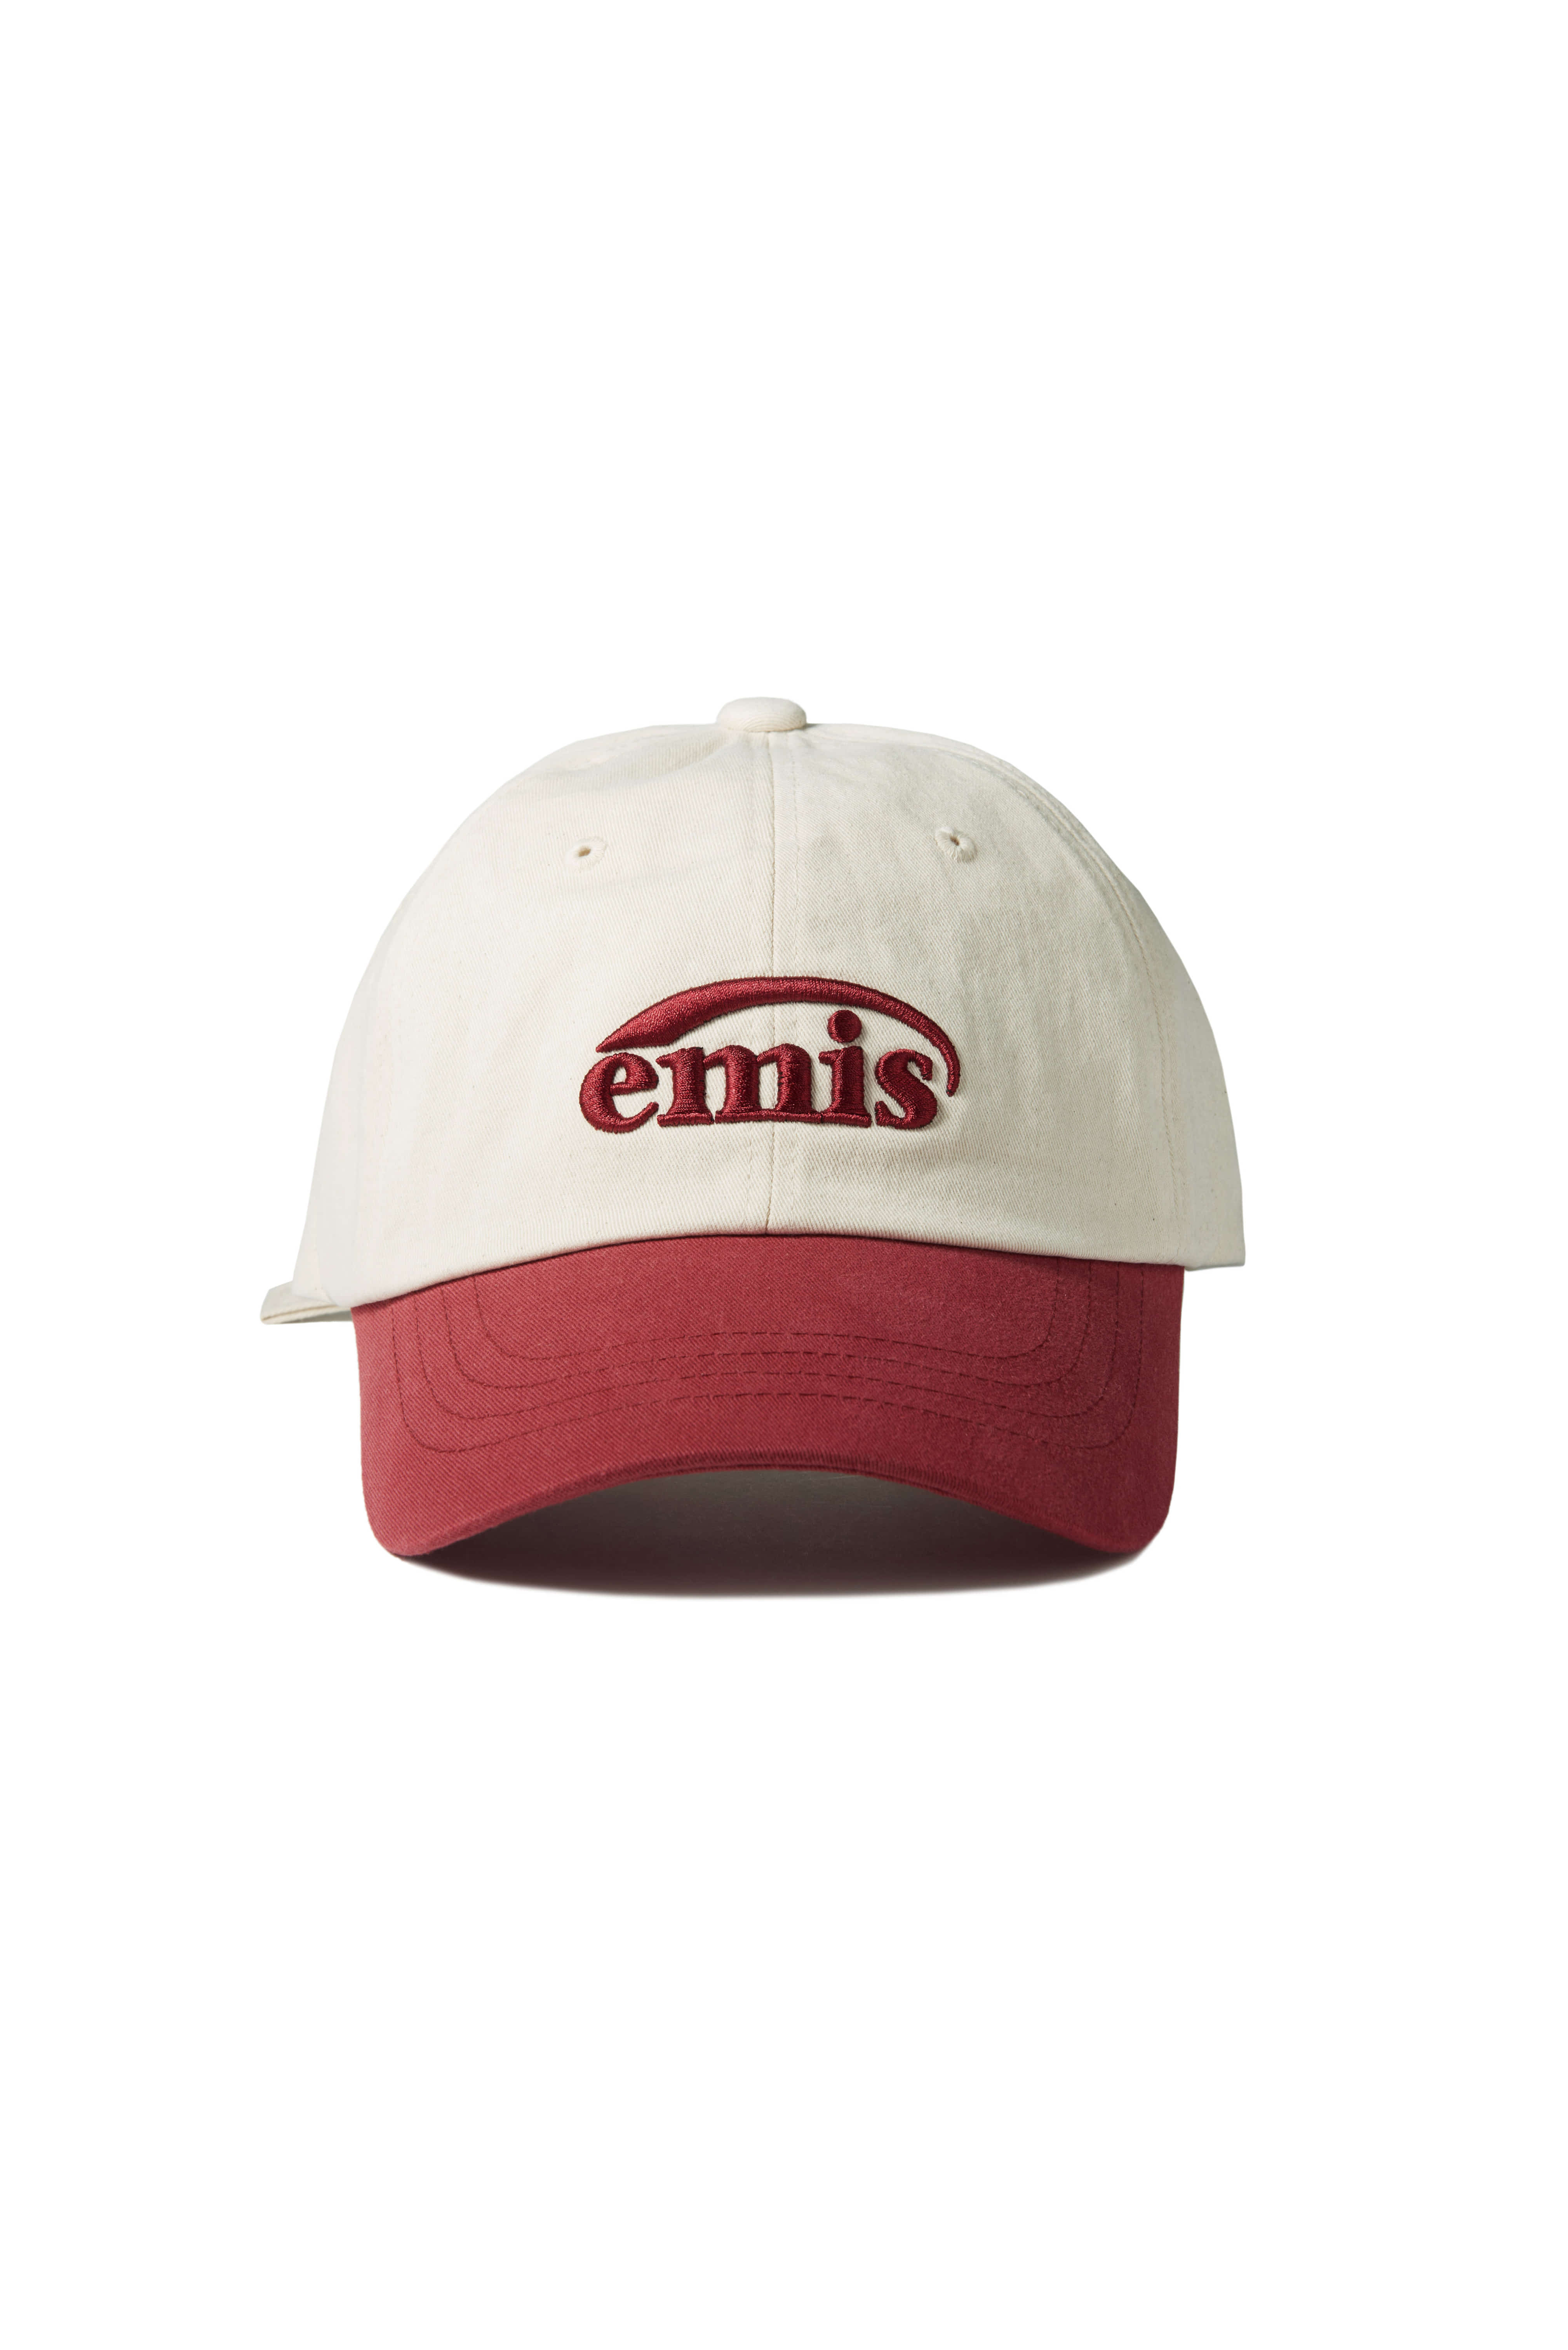 NEW LOGO BALL CAP-TWO-TONE RED